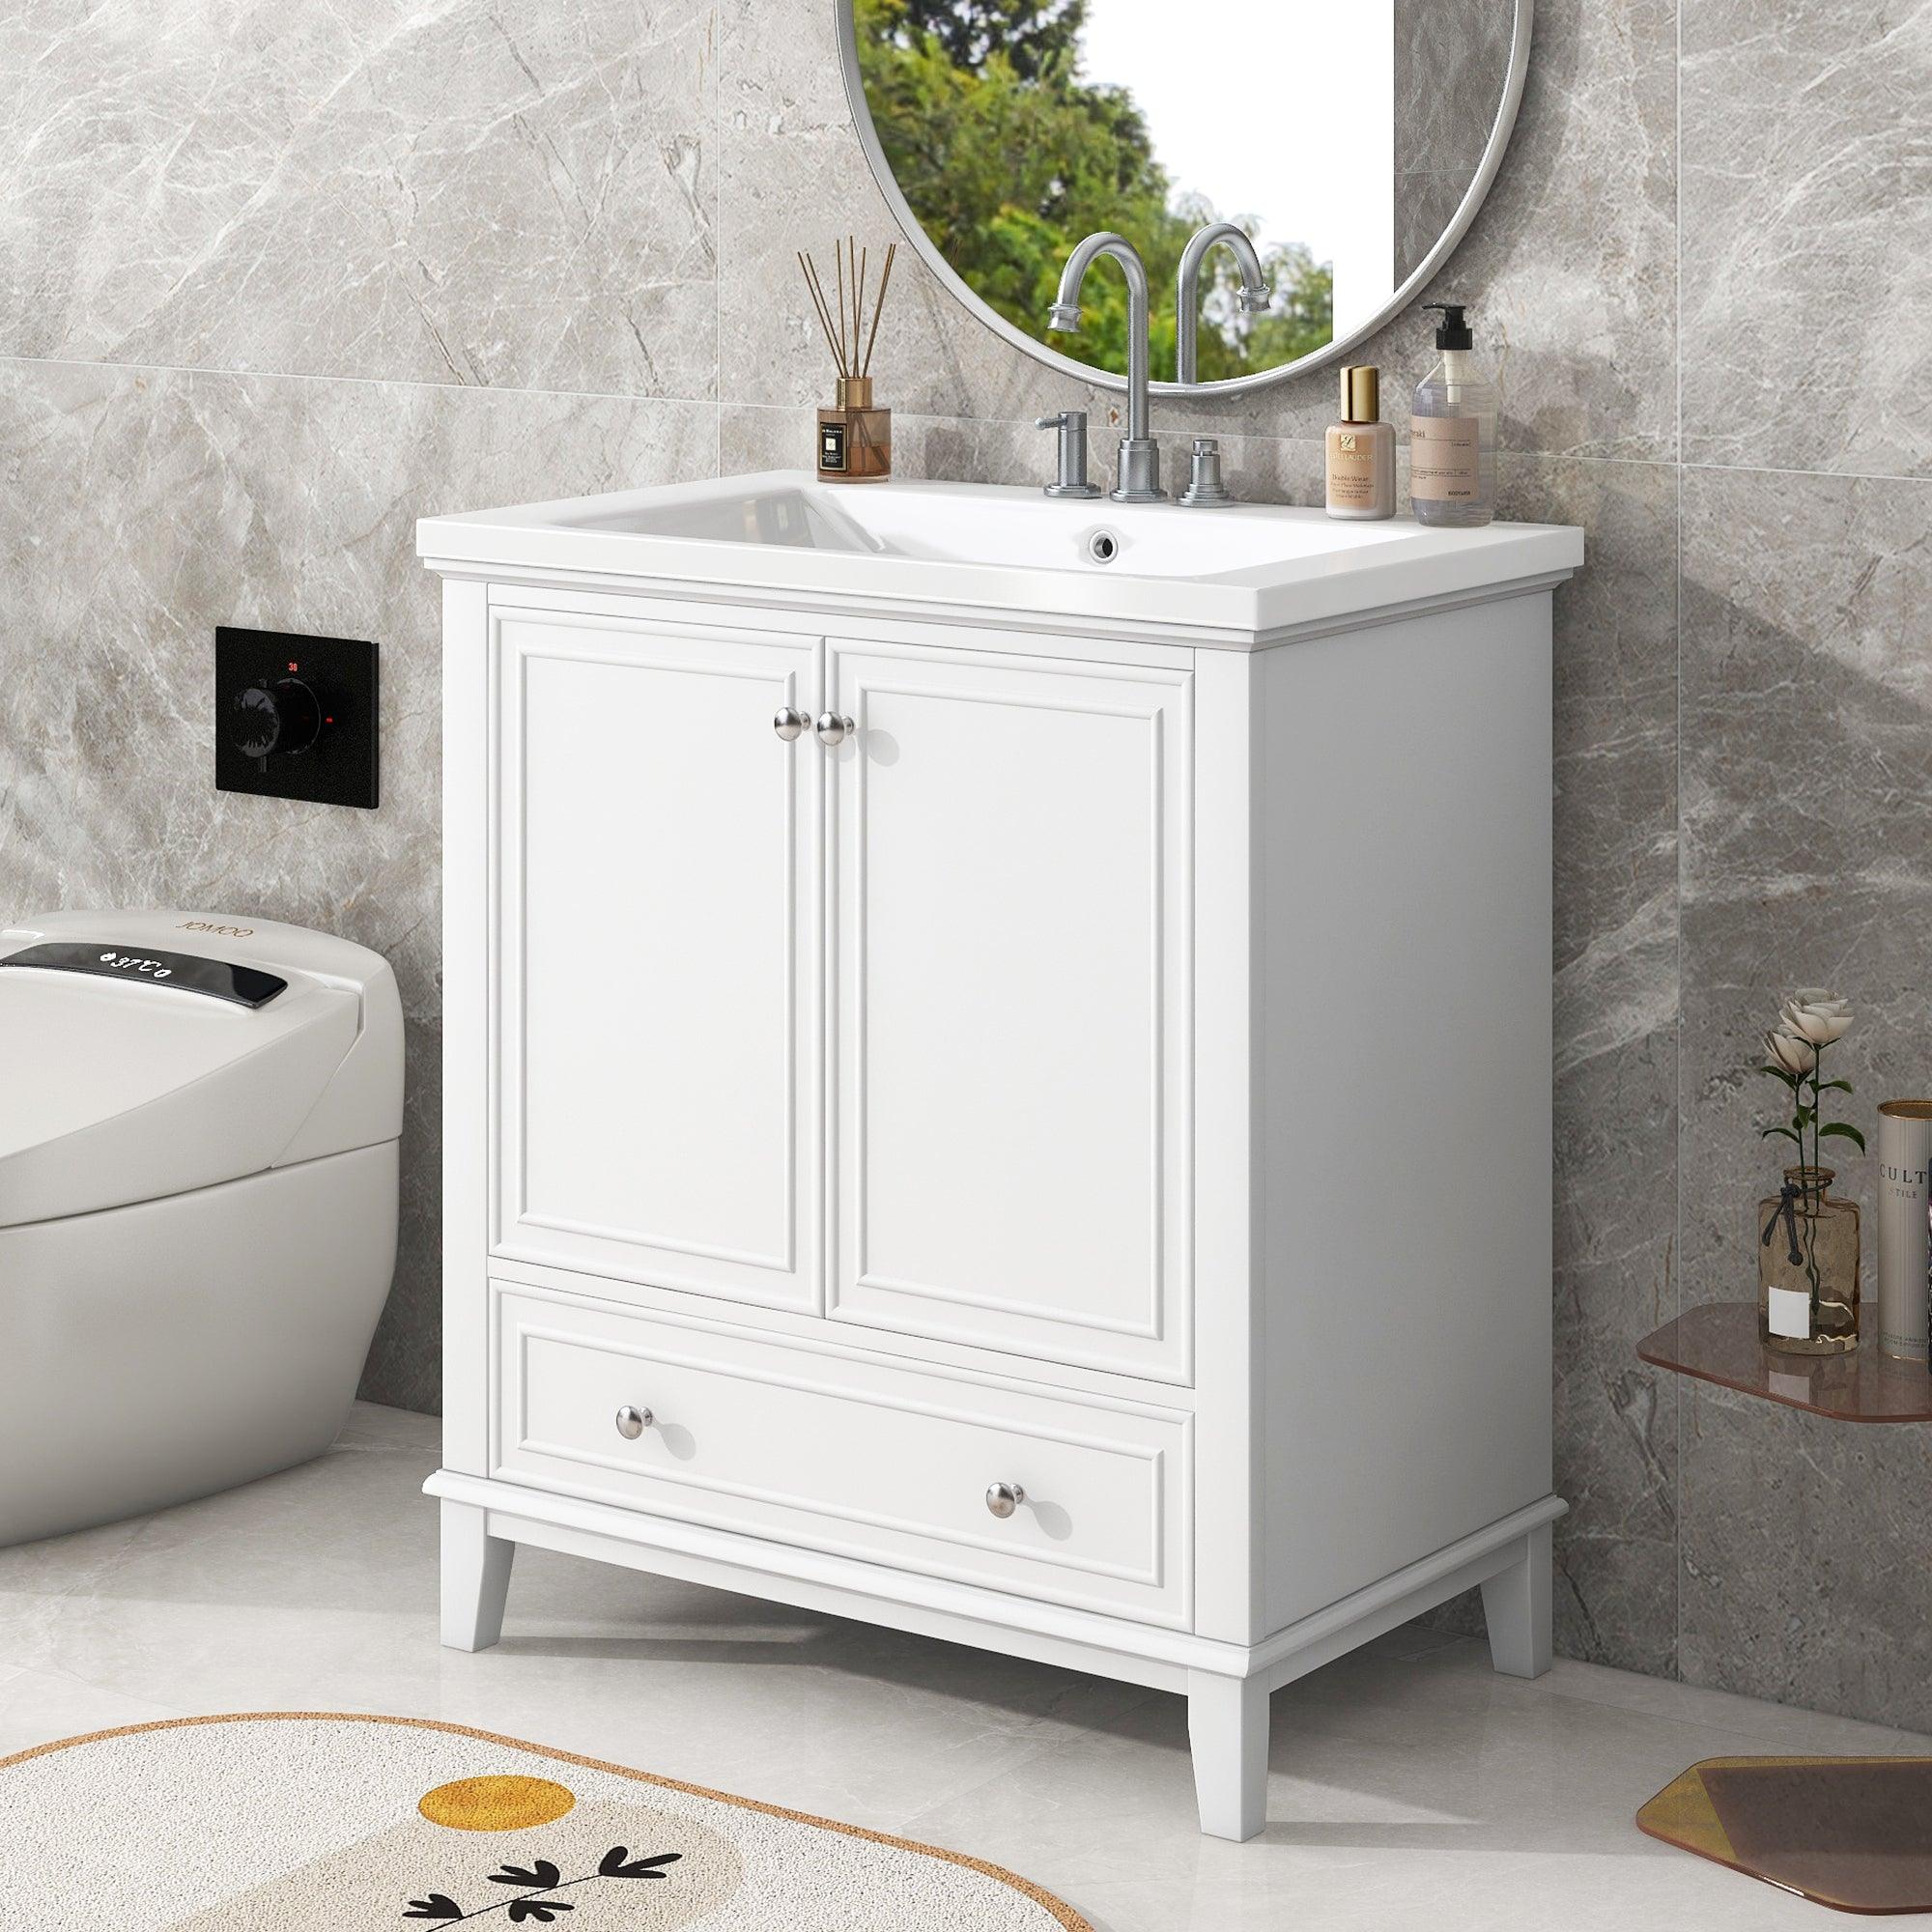 🆓🚛 30" Bathroom Vanity With Sink Combo, Multi-Functional Bathroom Cabinet With Doors & Drawer, Solid Frame & Mdf Board, White